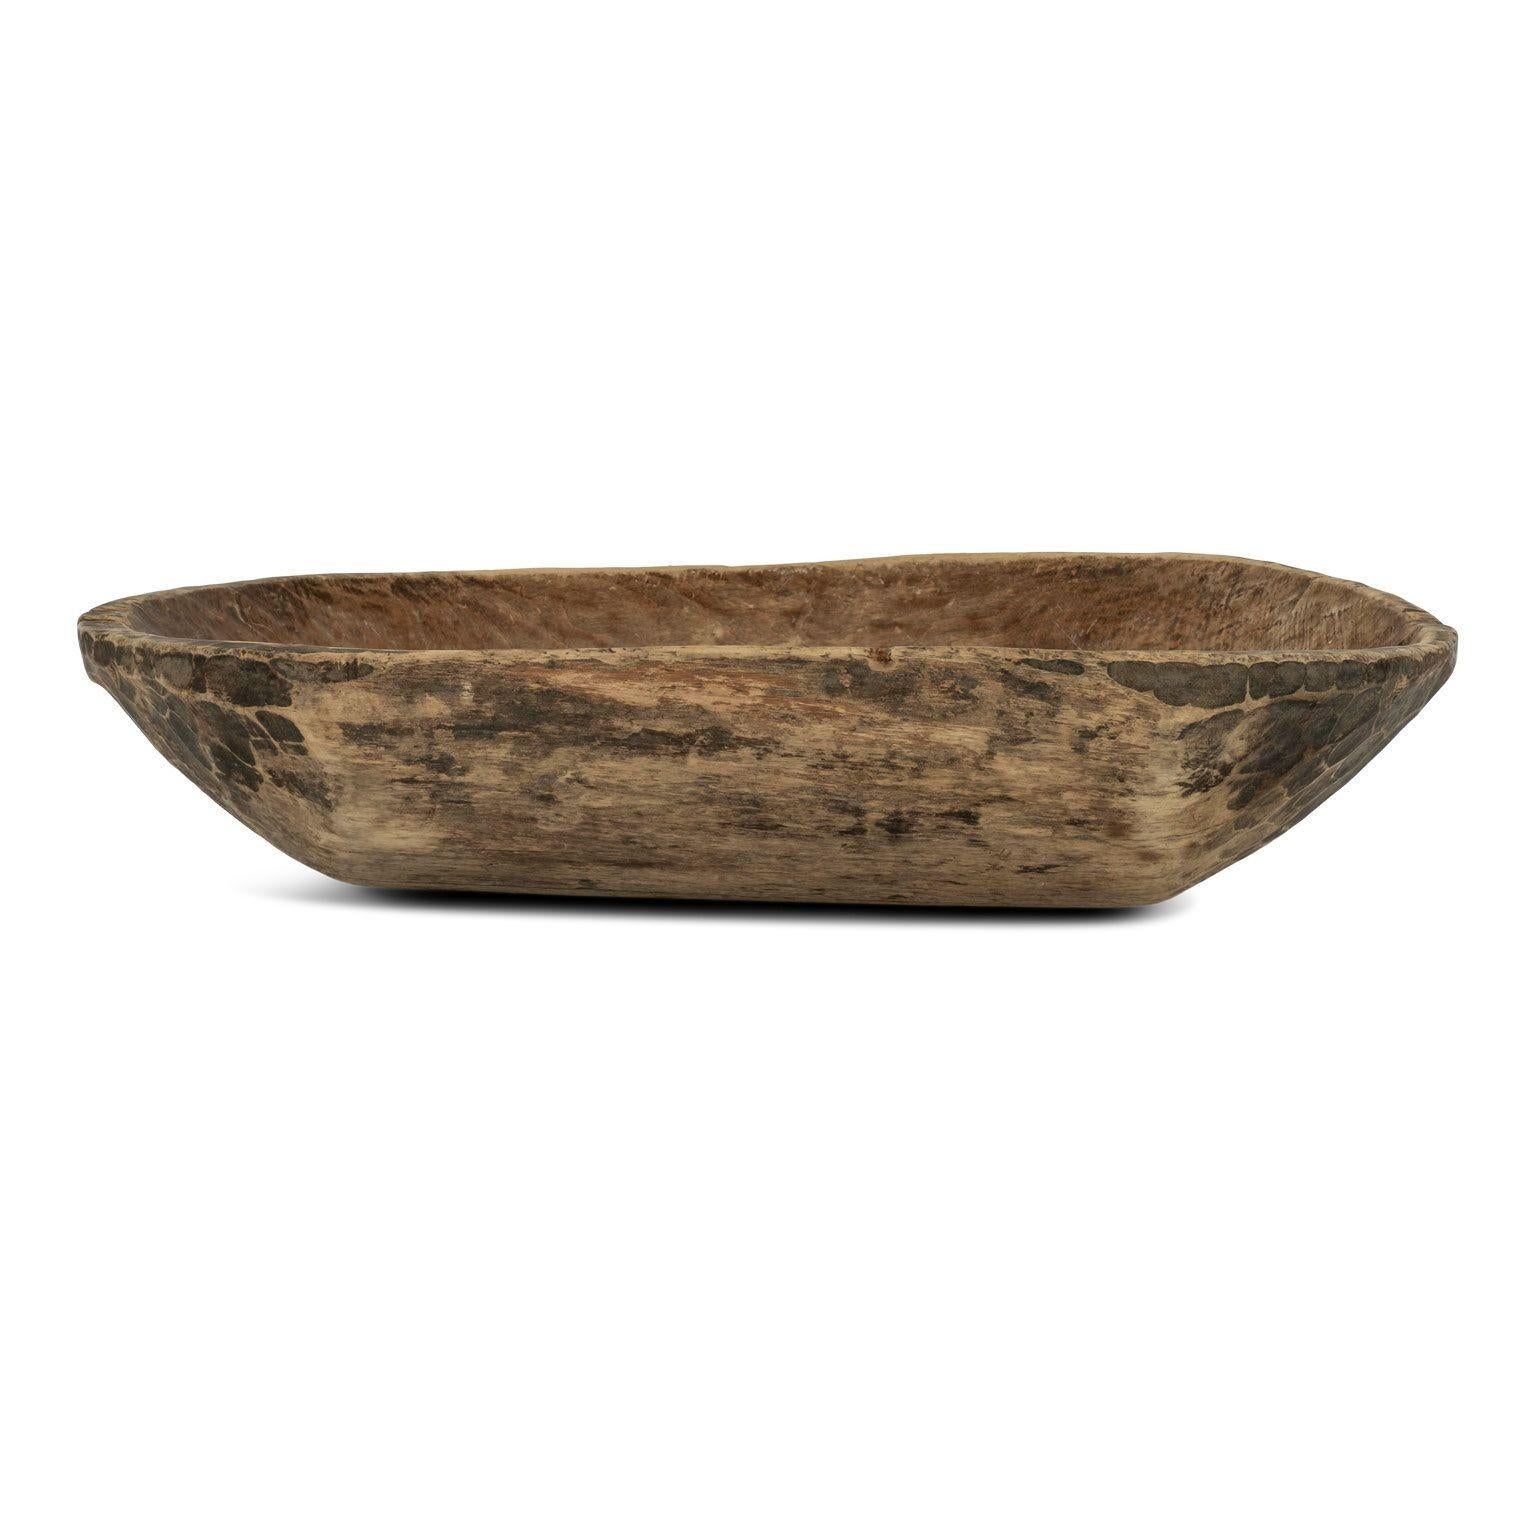 Large Swedish rustic trencher bowl, hand-carved in beech. Dates to 19th century.